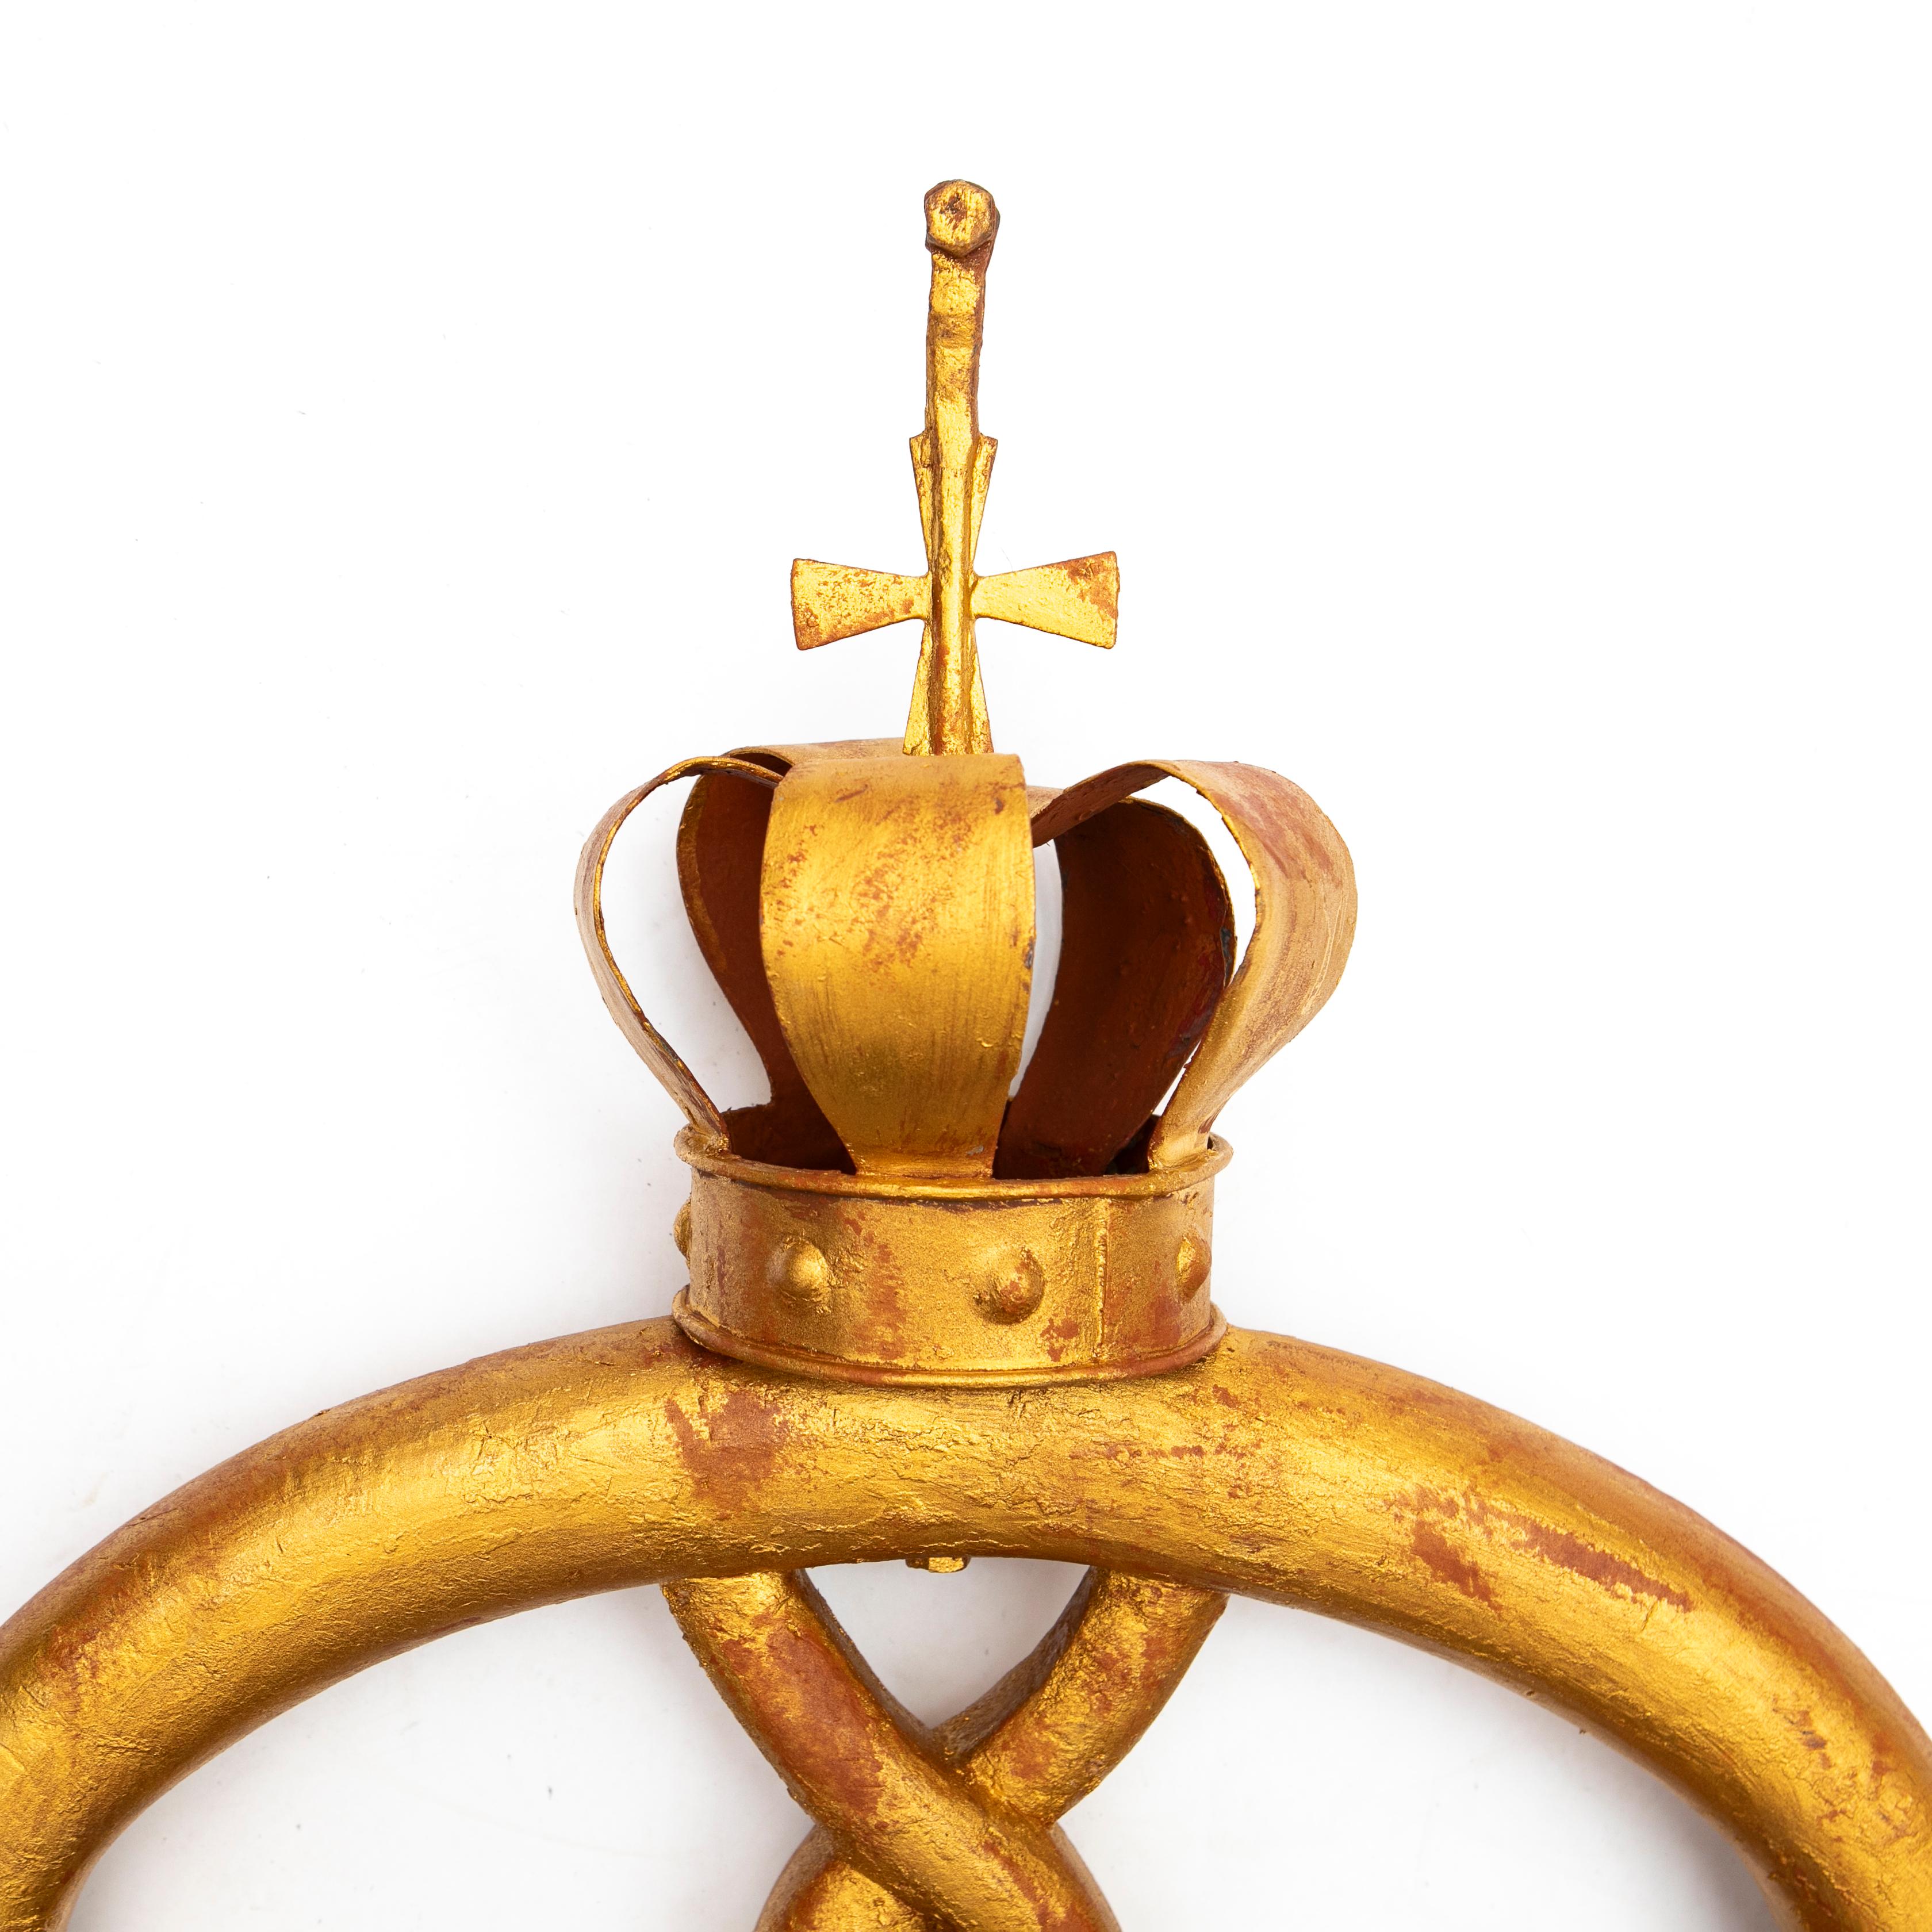 A large antique baker's pretzel shop sign from Denmark, approx. 1900.
The pretzel is carved wood with gold leaf finish on a red base and topped metal crown and cross.

Originally this sign would have hung from an arm extended out near the exterior